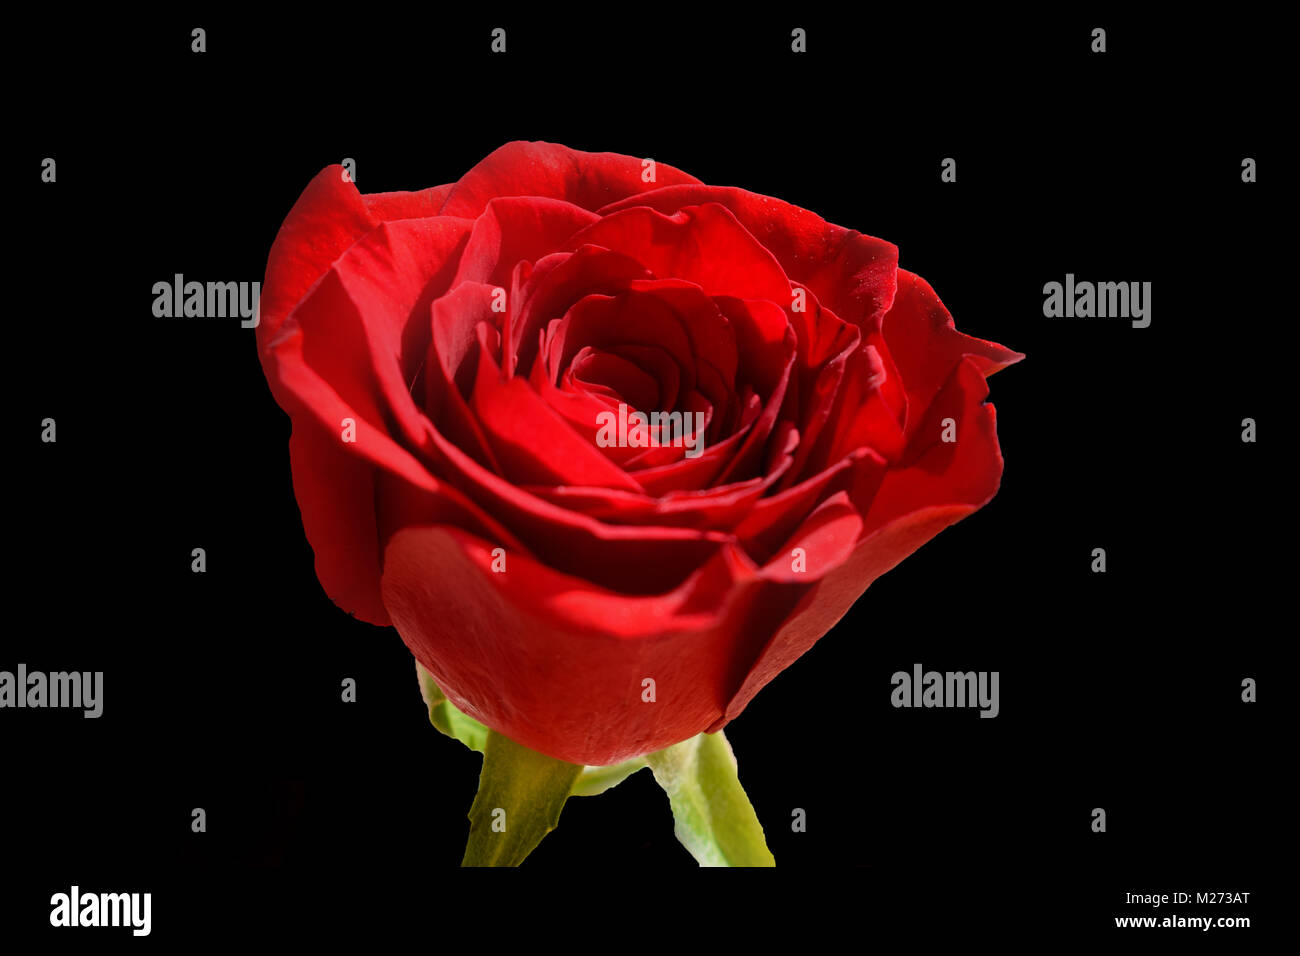 Red rose with black  background Stock Photo